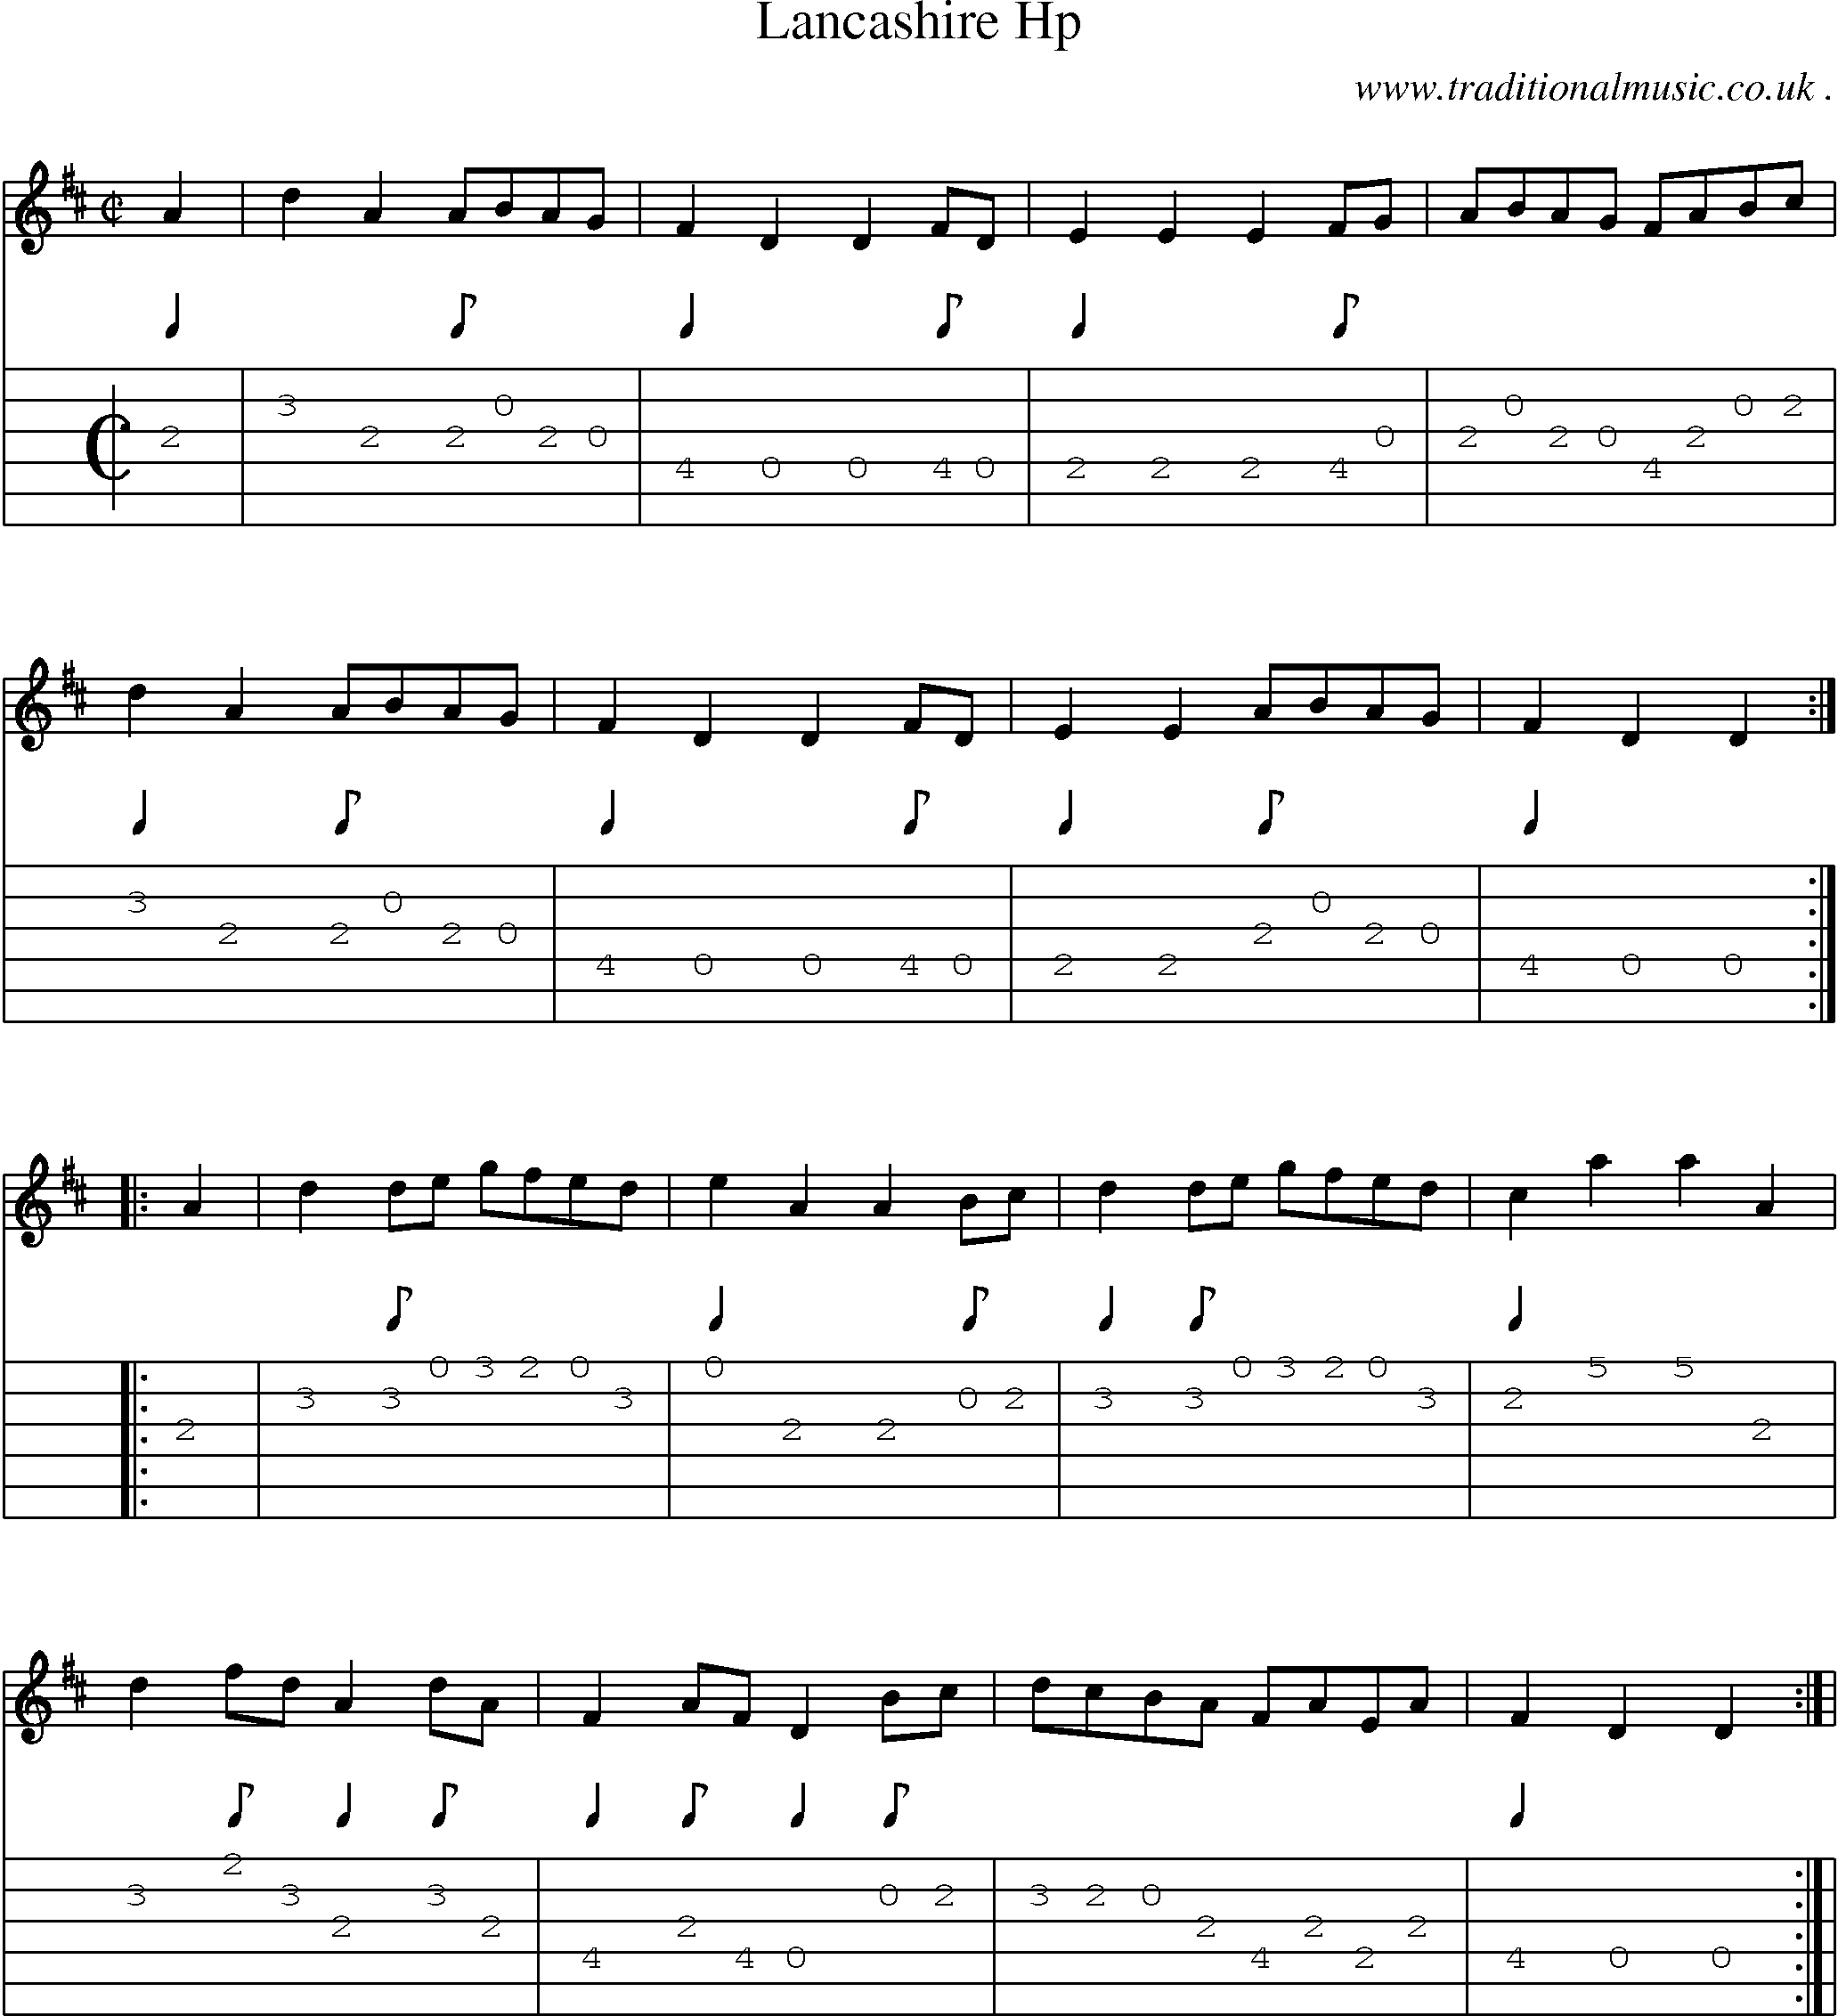 Sheet-Music and Guitar Tabs for Lancashire Hp